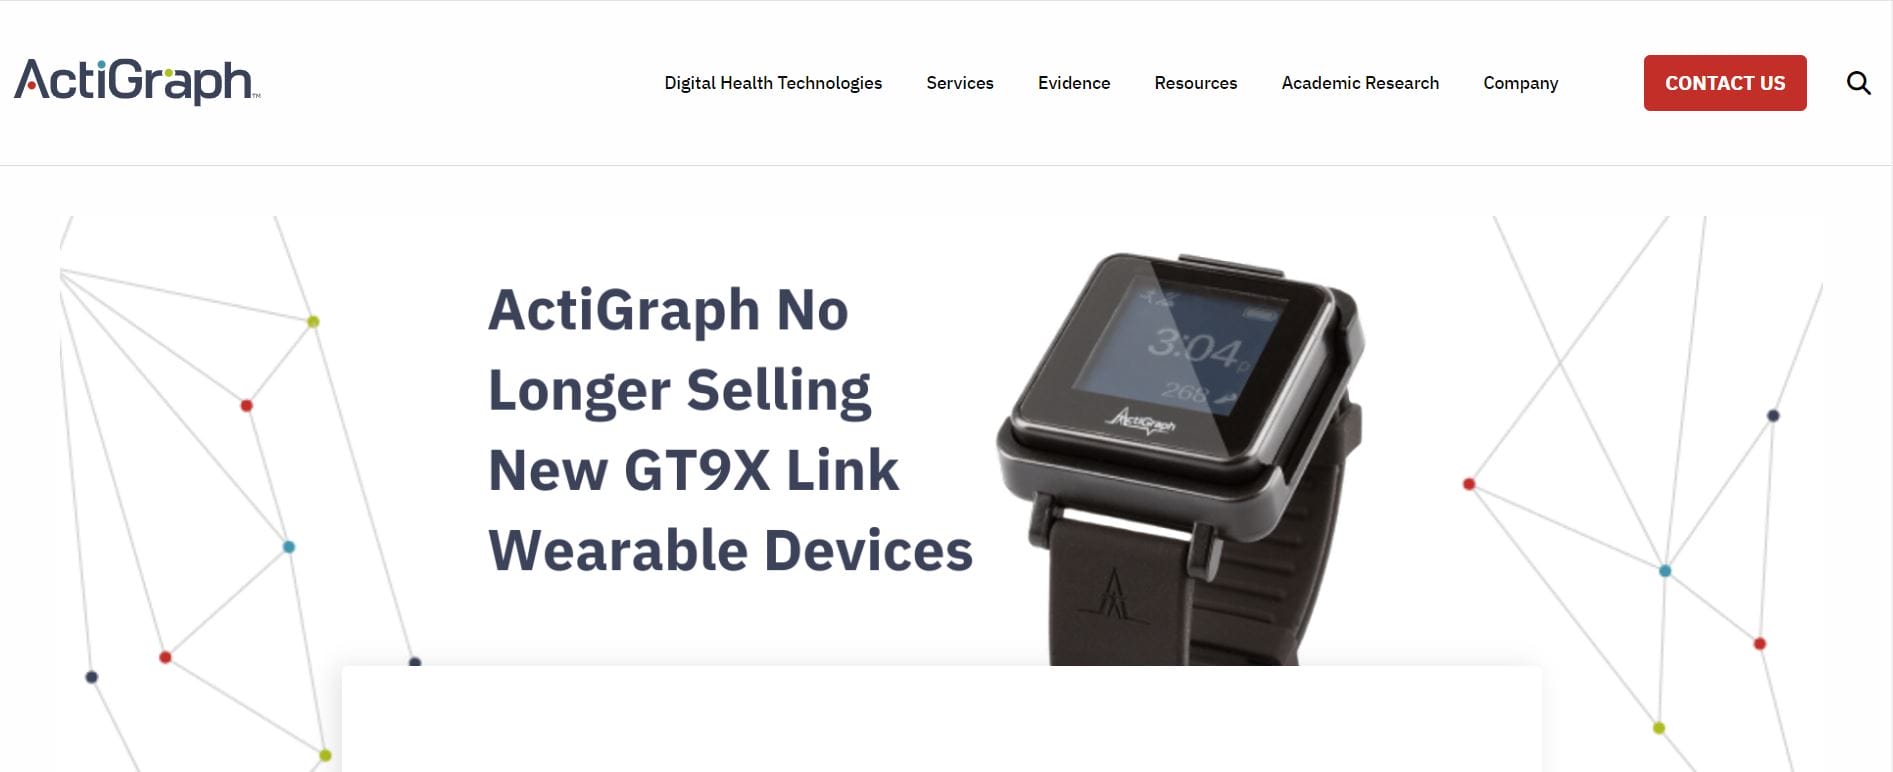 A wearable ActiGraph GT9X device displaying the time "3:04" on a plain background, with a headline announcing the discontinuation of GT9X Link sales.